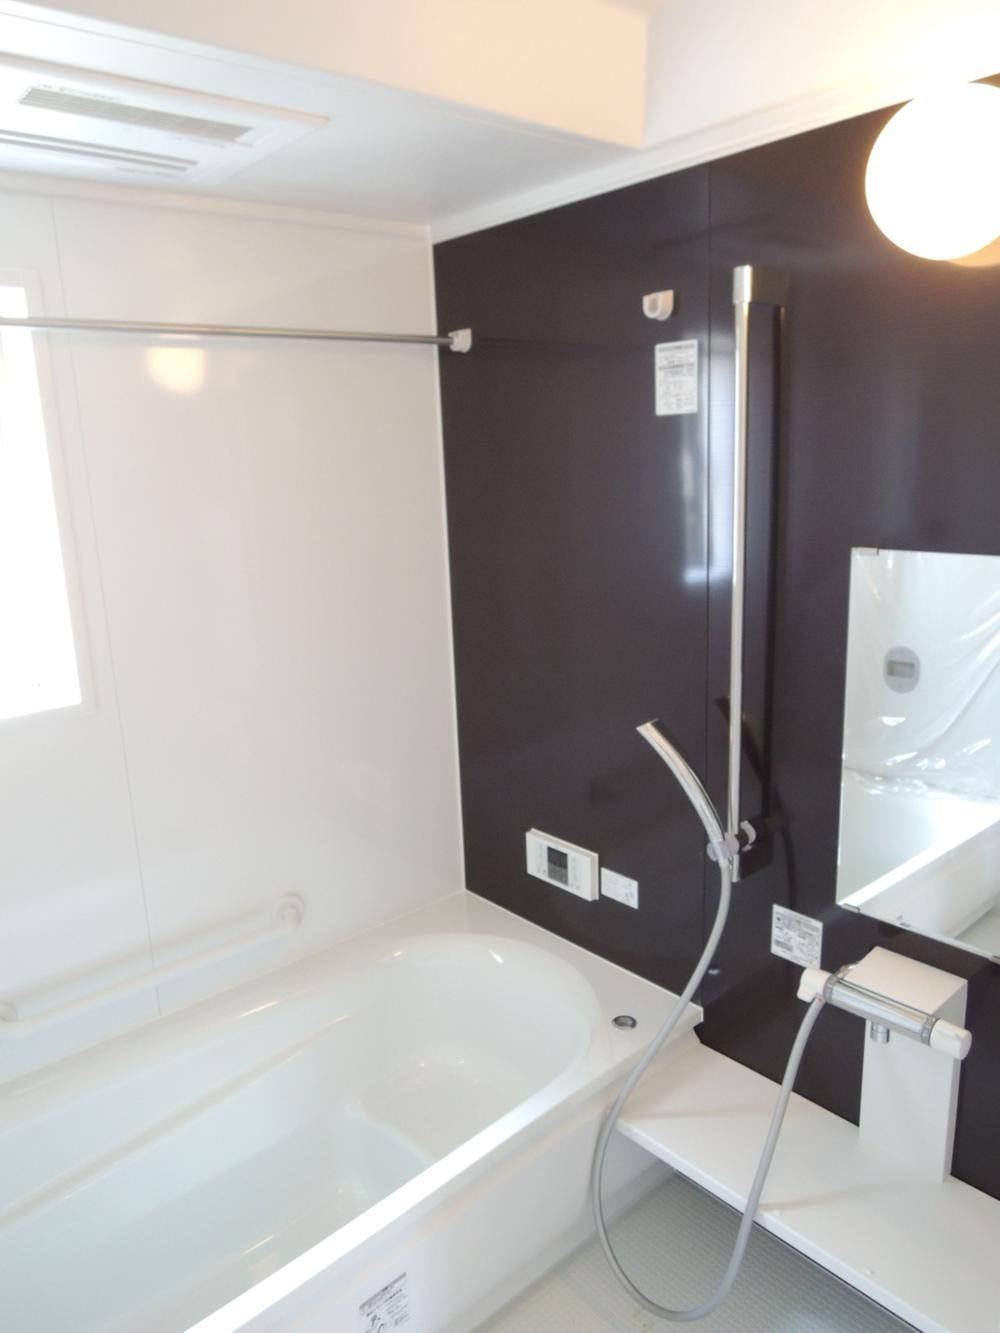 Same specifications photo (bathroom). Unit bus with ventilation dryer (same specifications)